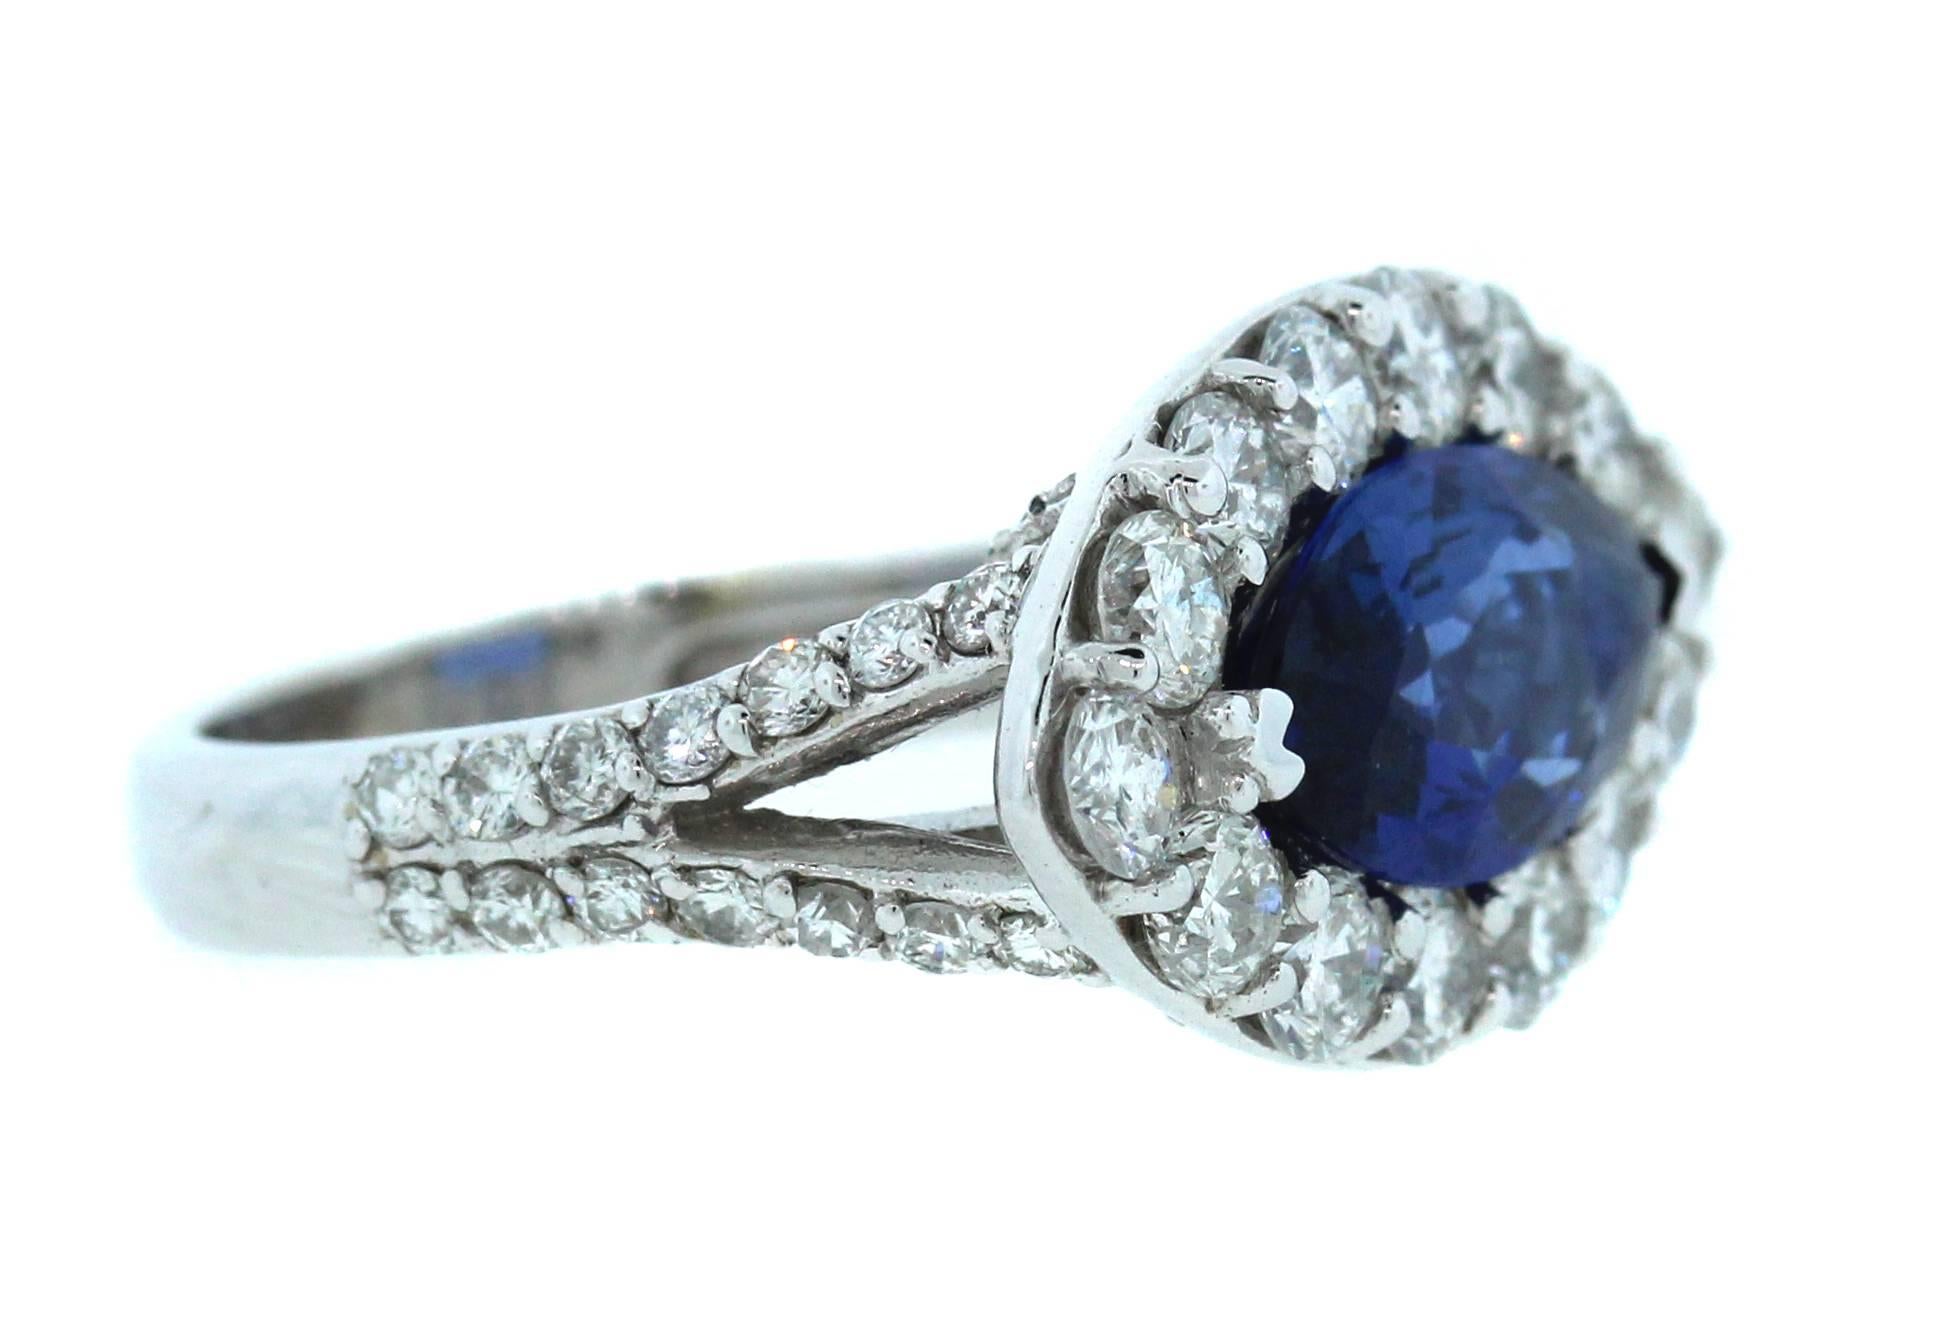 2.55 Carat Marquise Cut Blue Sapphire Diamond 18K White Gold Cocktail Ring

2.55ct. Blue Sapphire. Marquise cut

2ct. apprx diamonds throughout face of ring and half of shank

Face of ring is 0.8 inch length x 0.45 inch wide

Size 6.5. Sizable. 